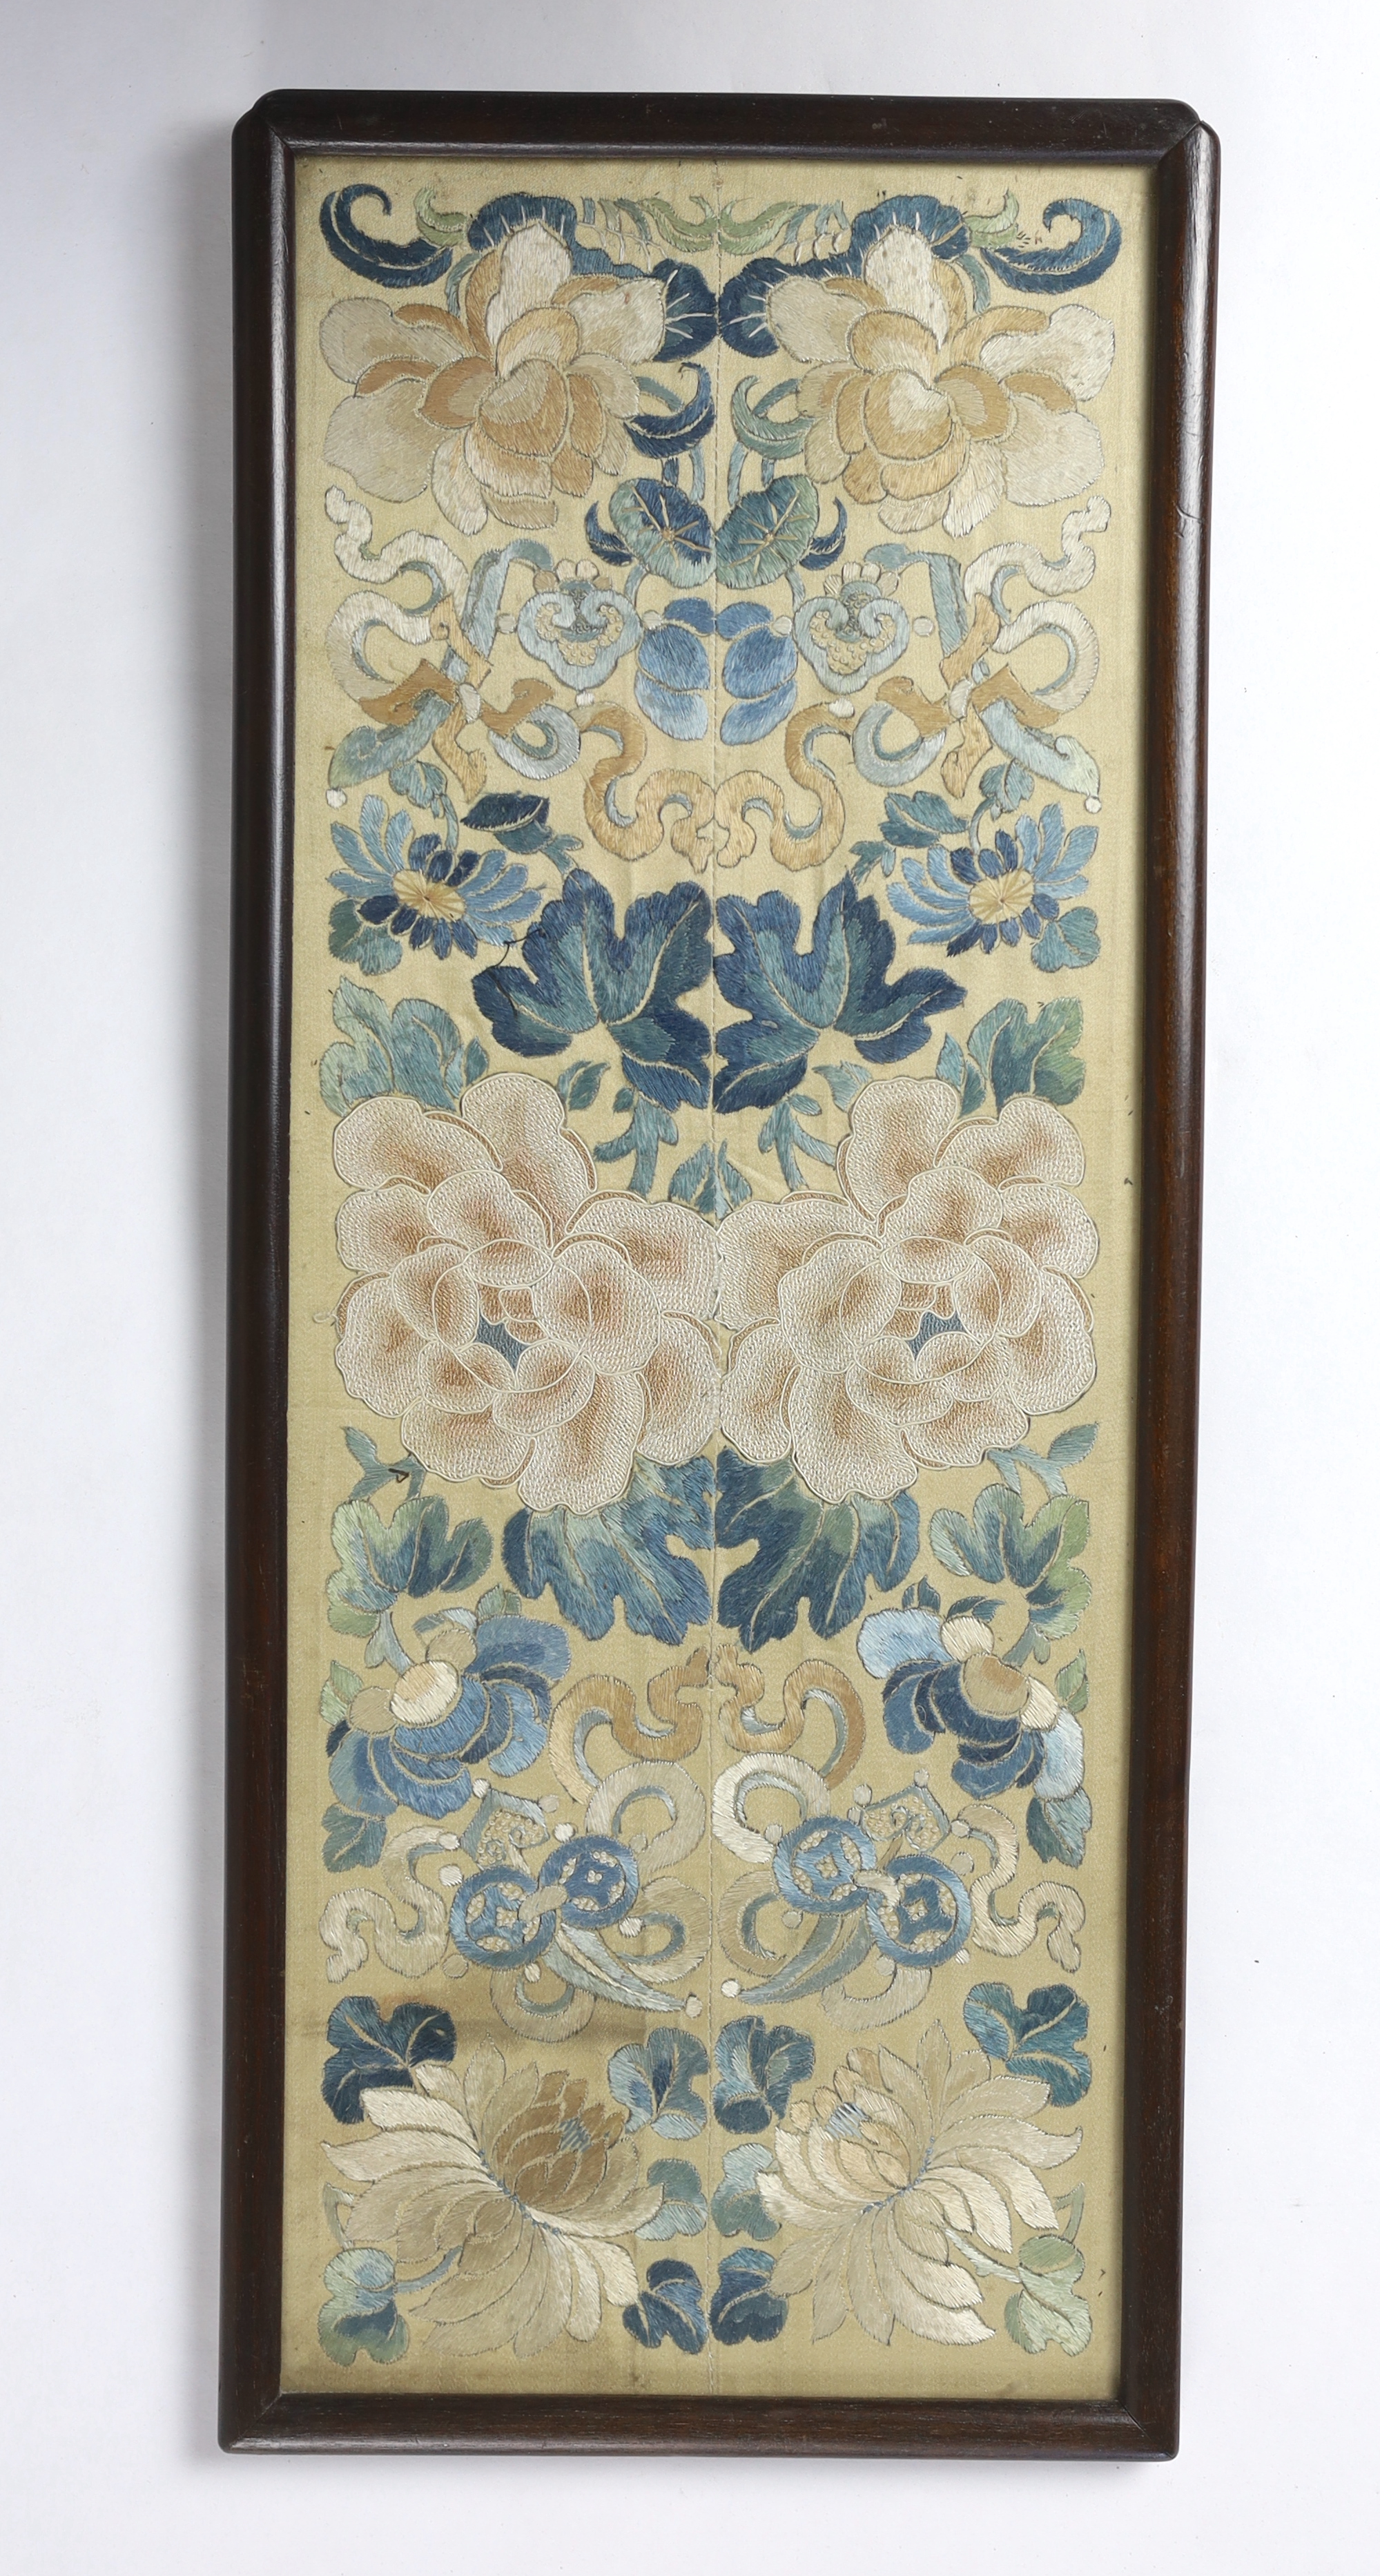 A pair of late 19th / early 20th century sleeve bands, framed together, worked in Chinese knot and stem stitch as flowers and auspicious symbols, 19cm wide x 49.5cm high